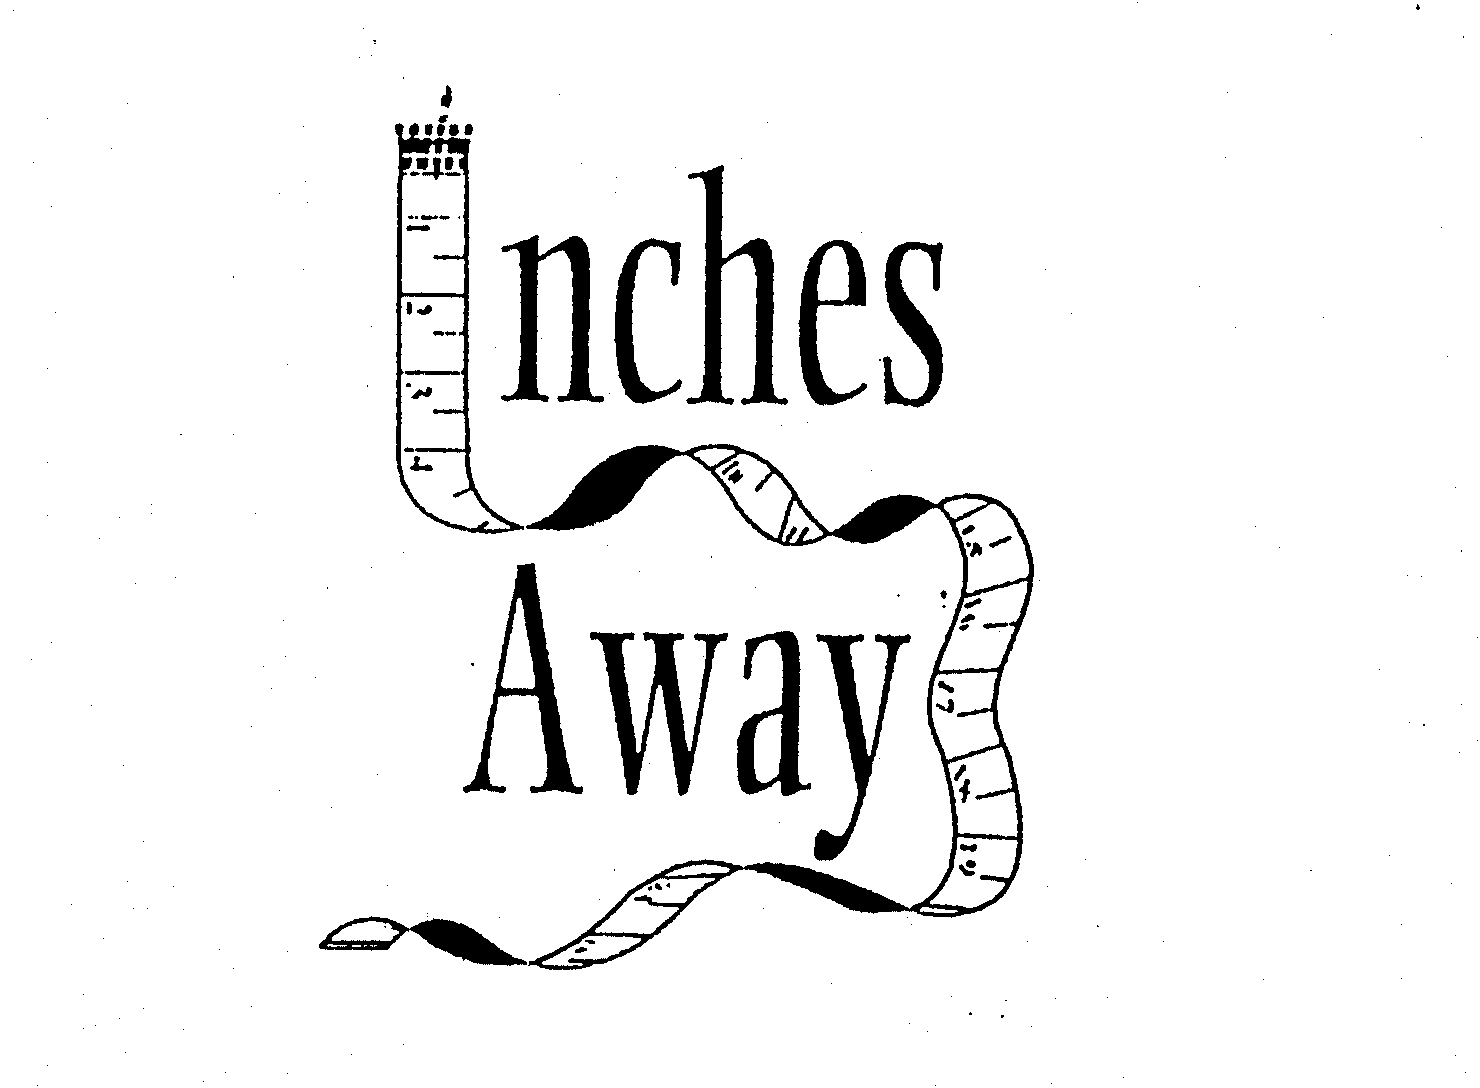  INCHES AWAY